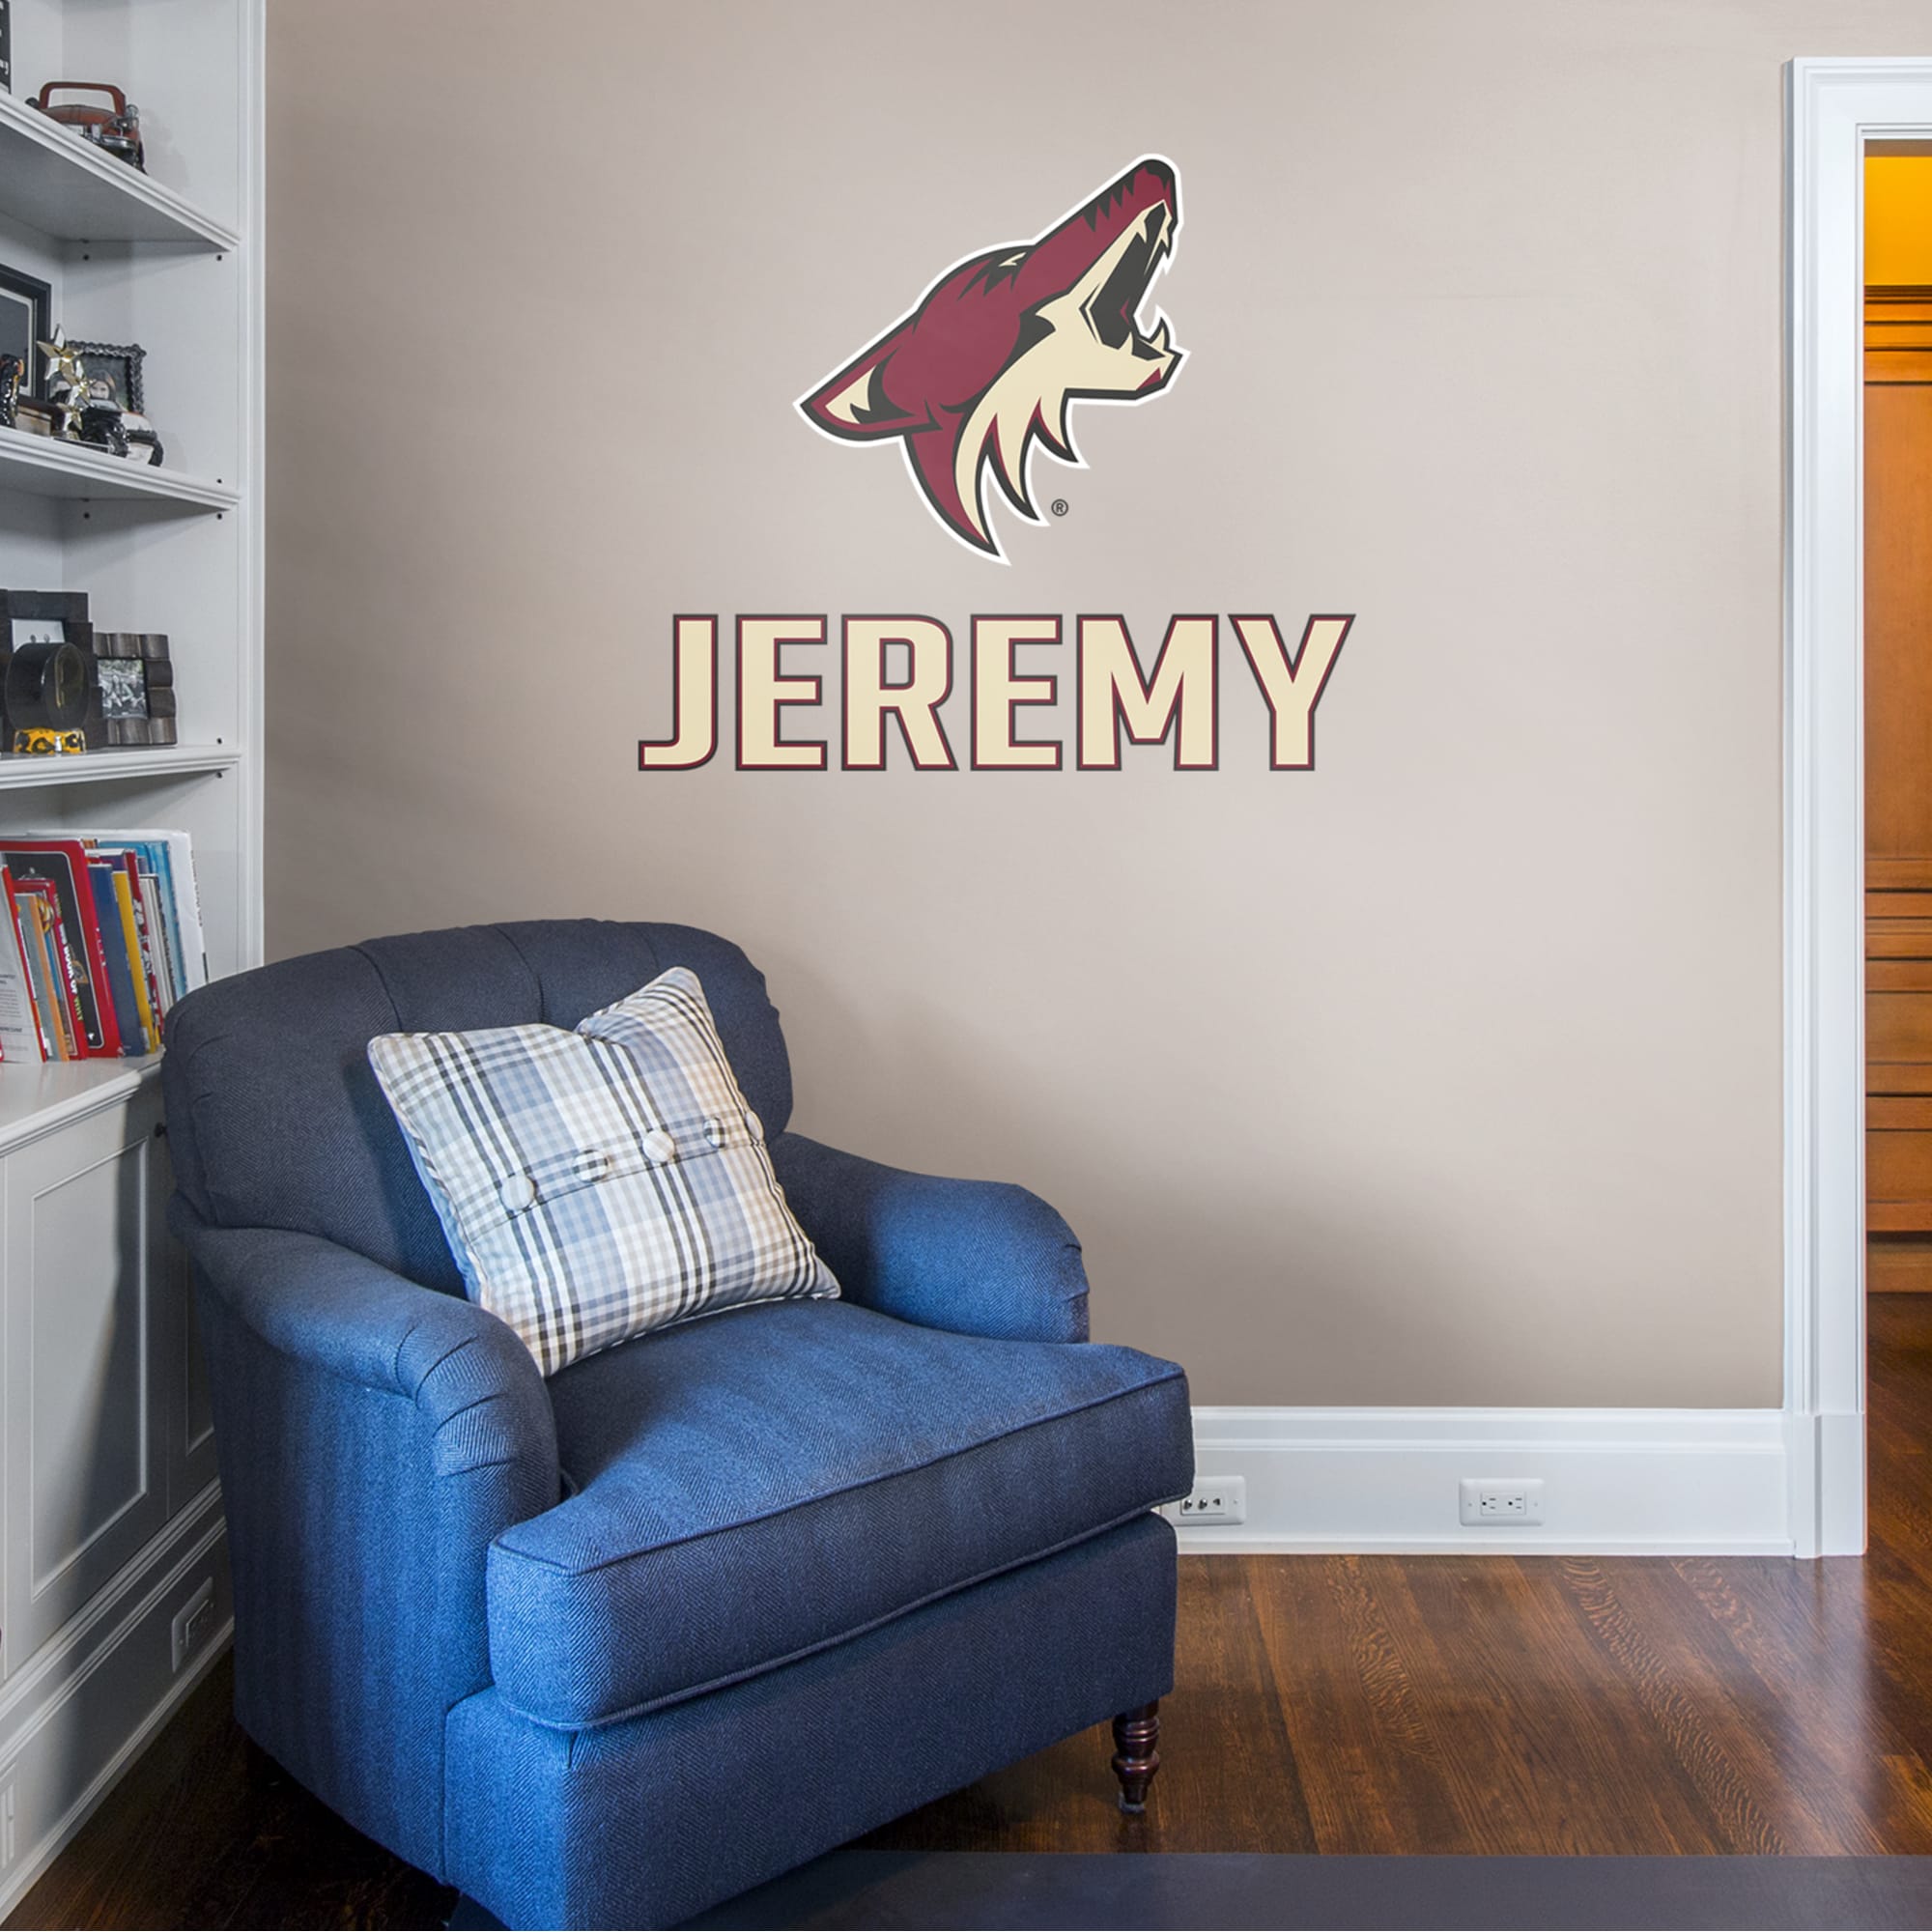 Arizona Coyotes: Stacked Personalized Name - Officially Licensed NHL Transfer Decal in Sand (39.5"W x 52"H) by Fathead | Vinyl